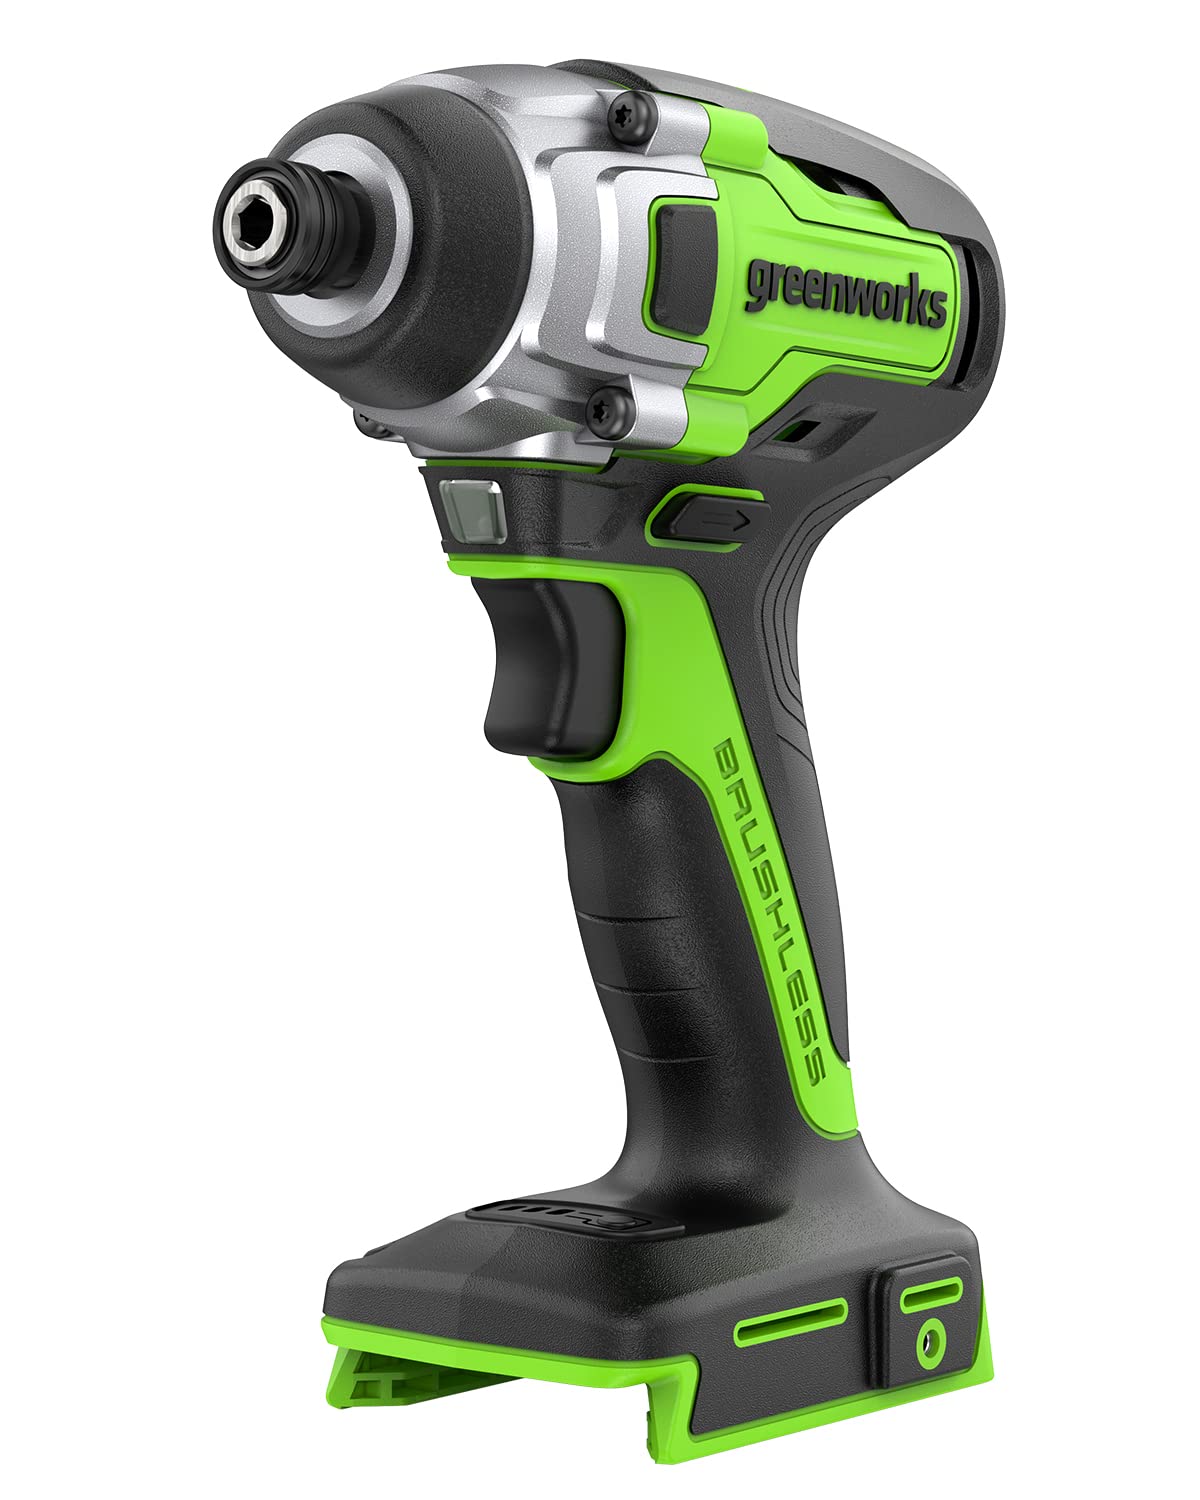 Greenworks 24V Brushless Cordless Impact Driver Kit, 2650in./lbs Torque, Variable Speed-Battery and Charger Sold Separately